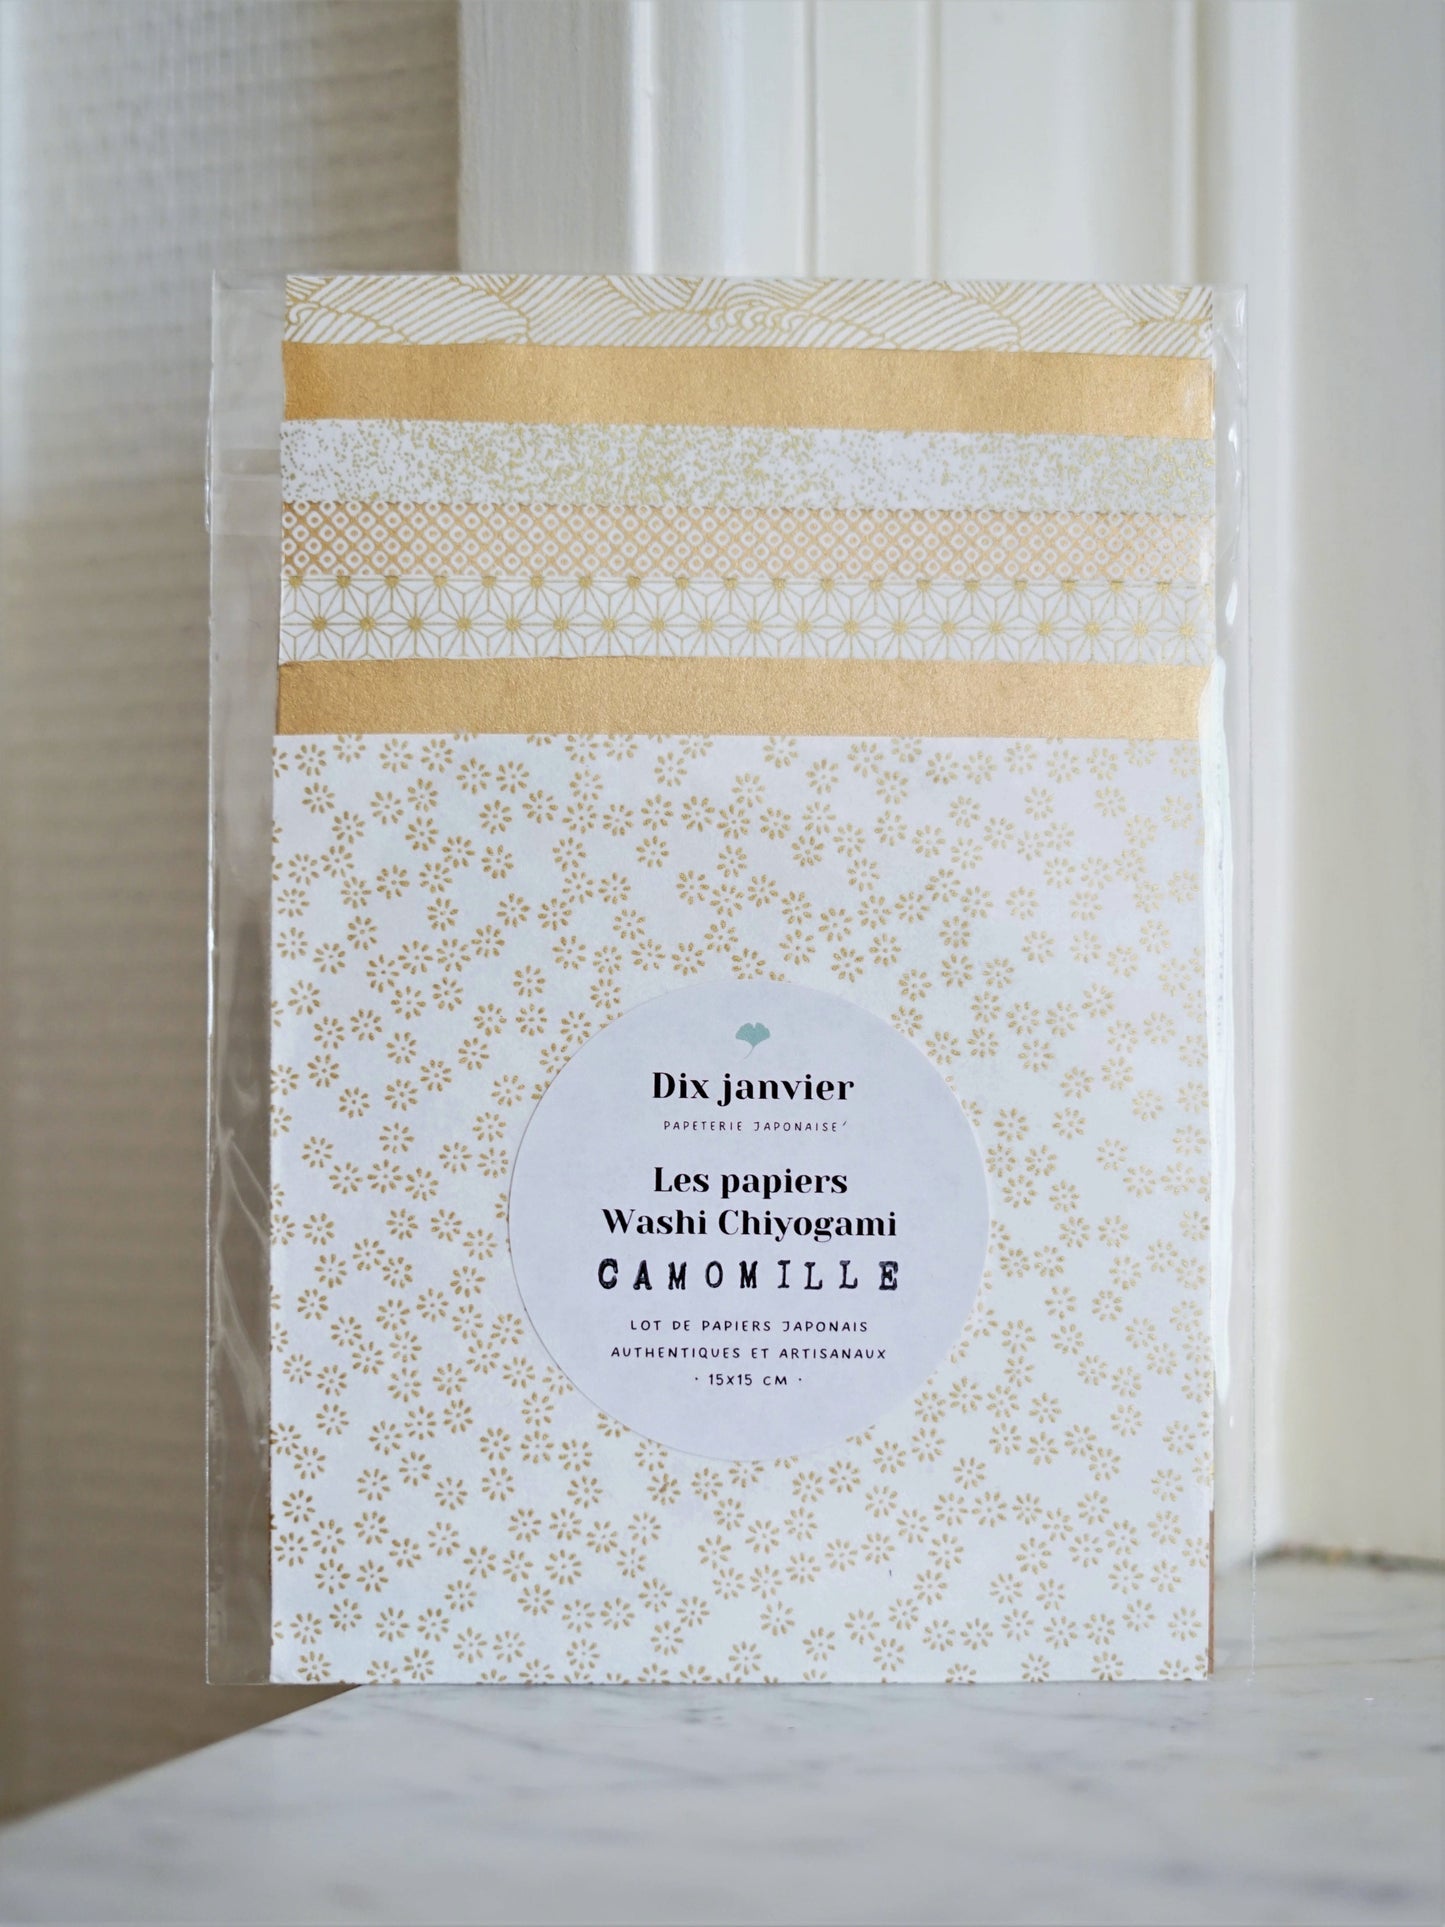 Kit of 7 Japanese origami papers - "Chamomile" - White and gold